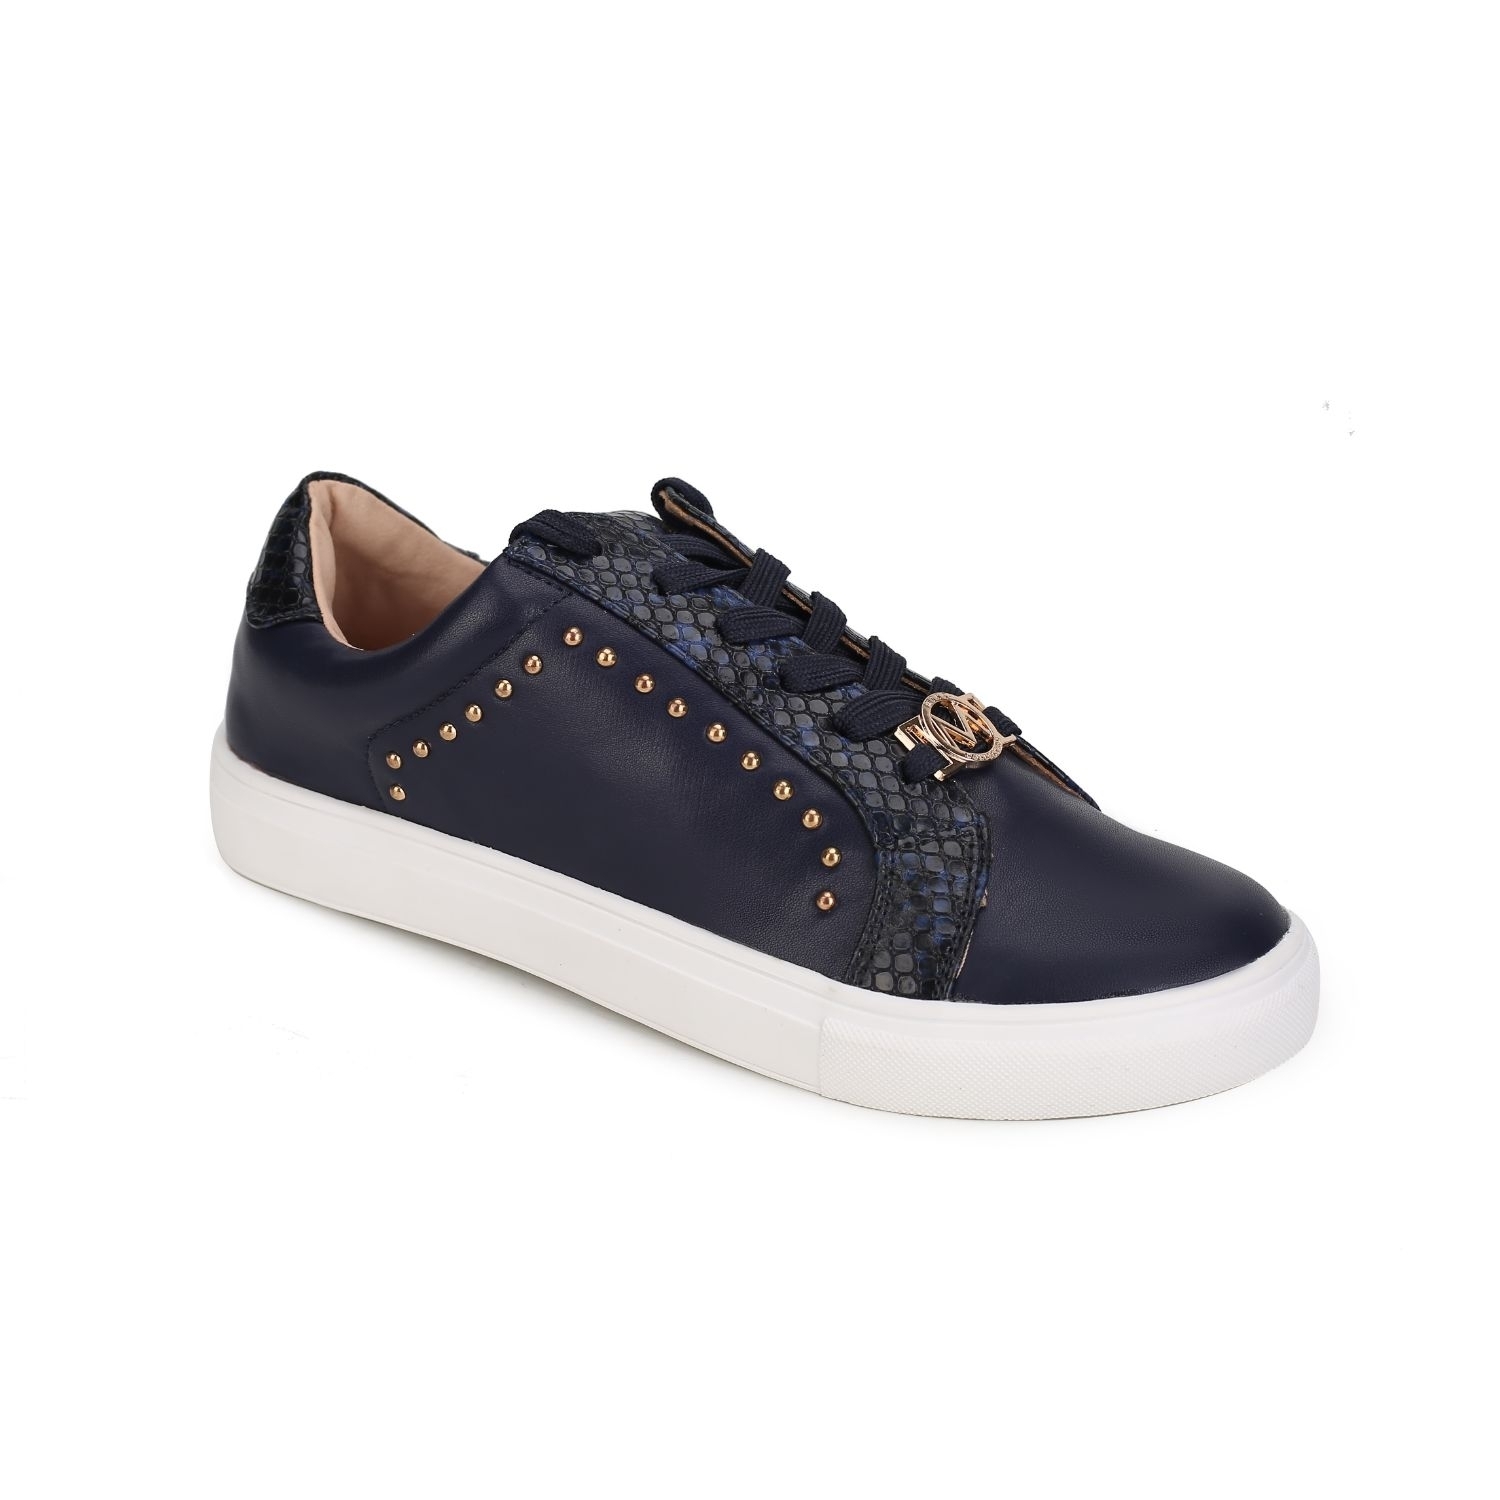 MKF Collection Tamara Snake Tennis Shoes For Women With Adjustable Laces By Mia K - Navy-9.5